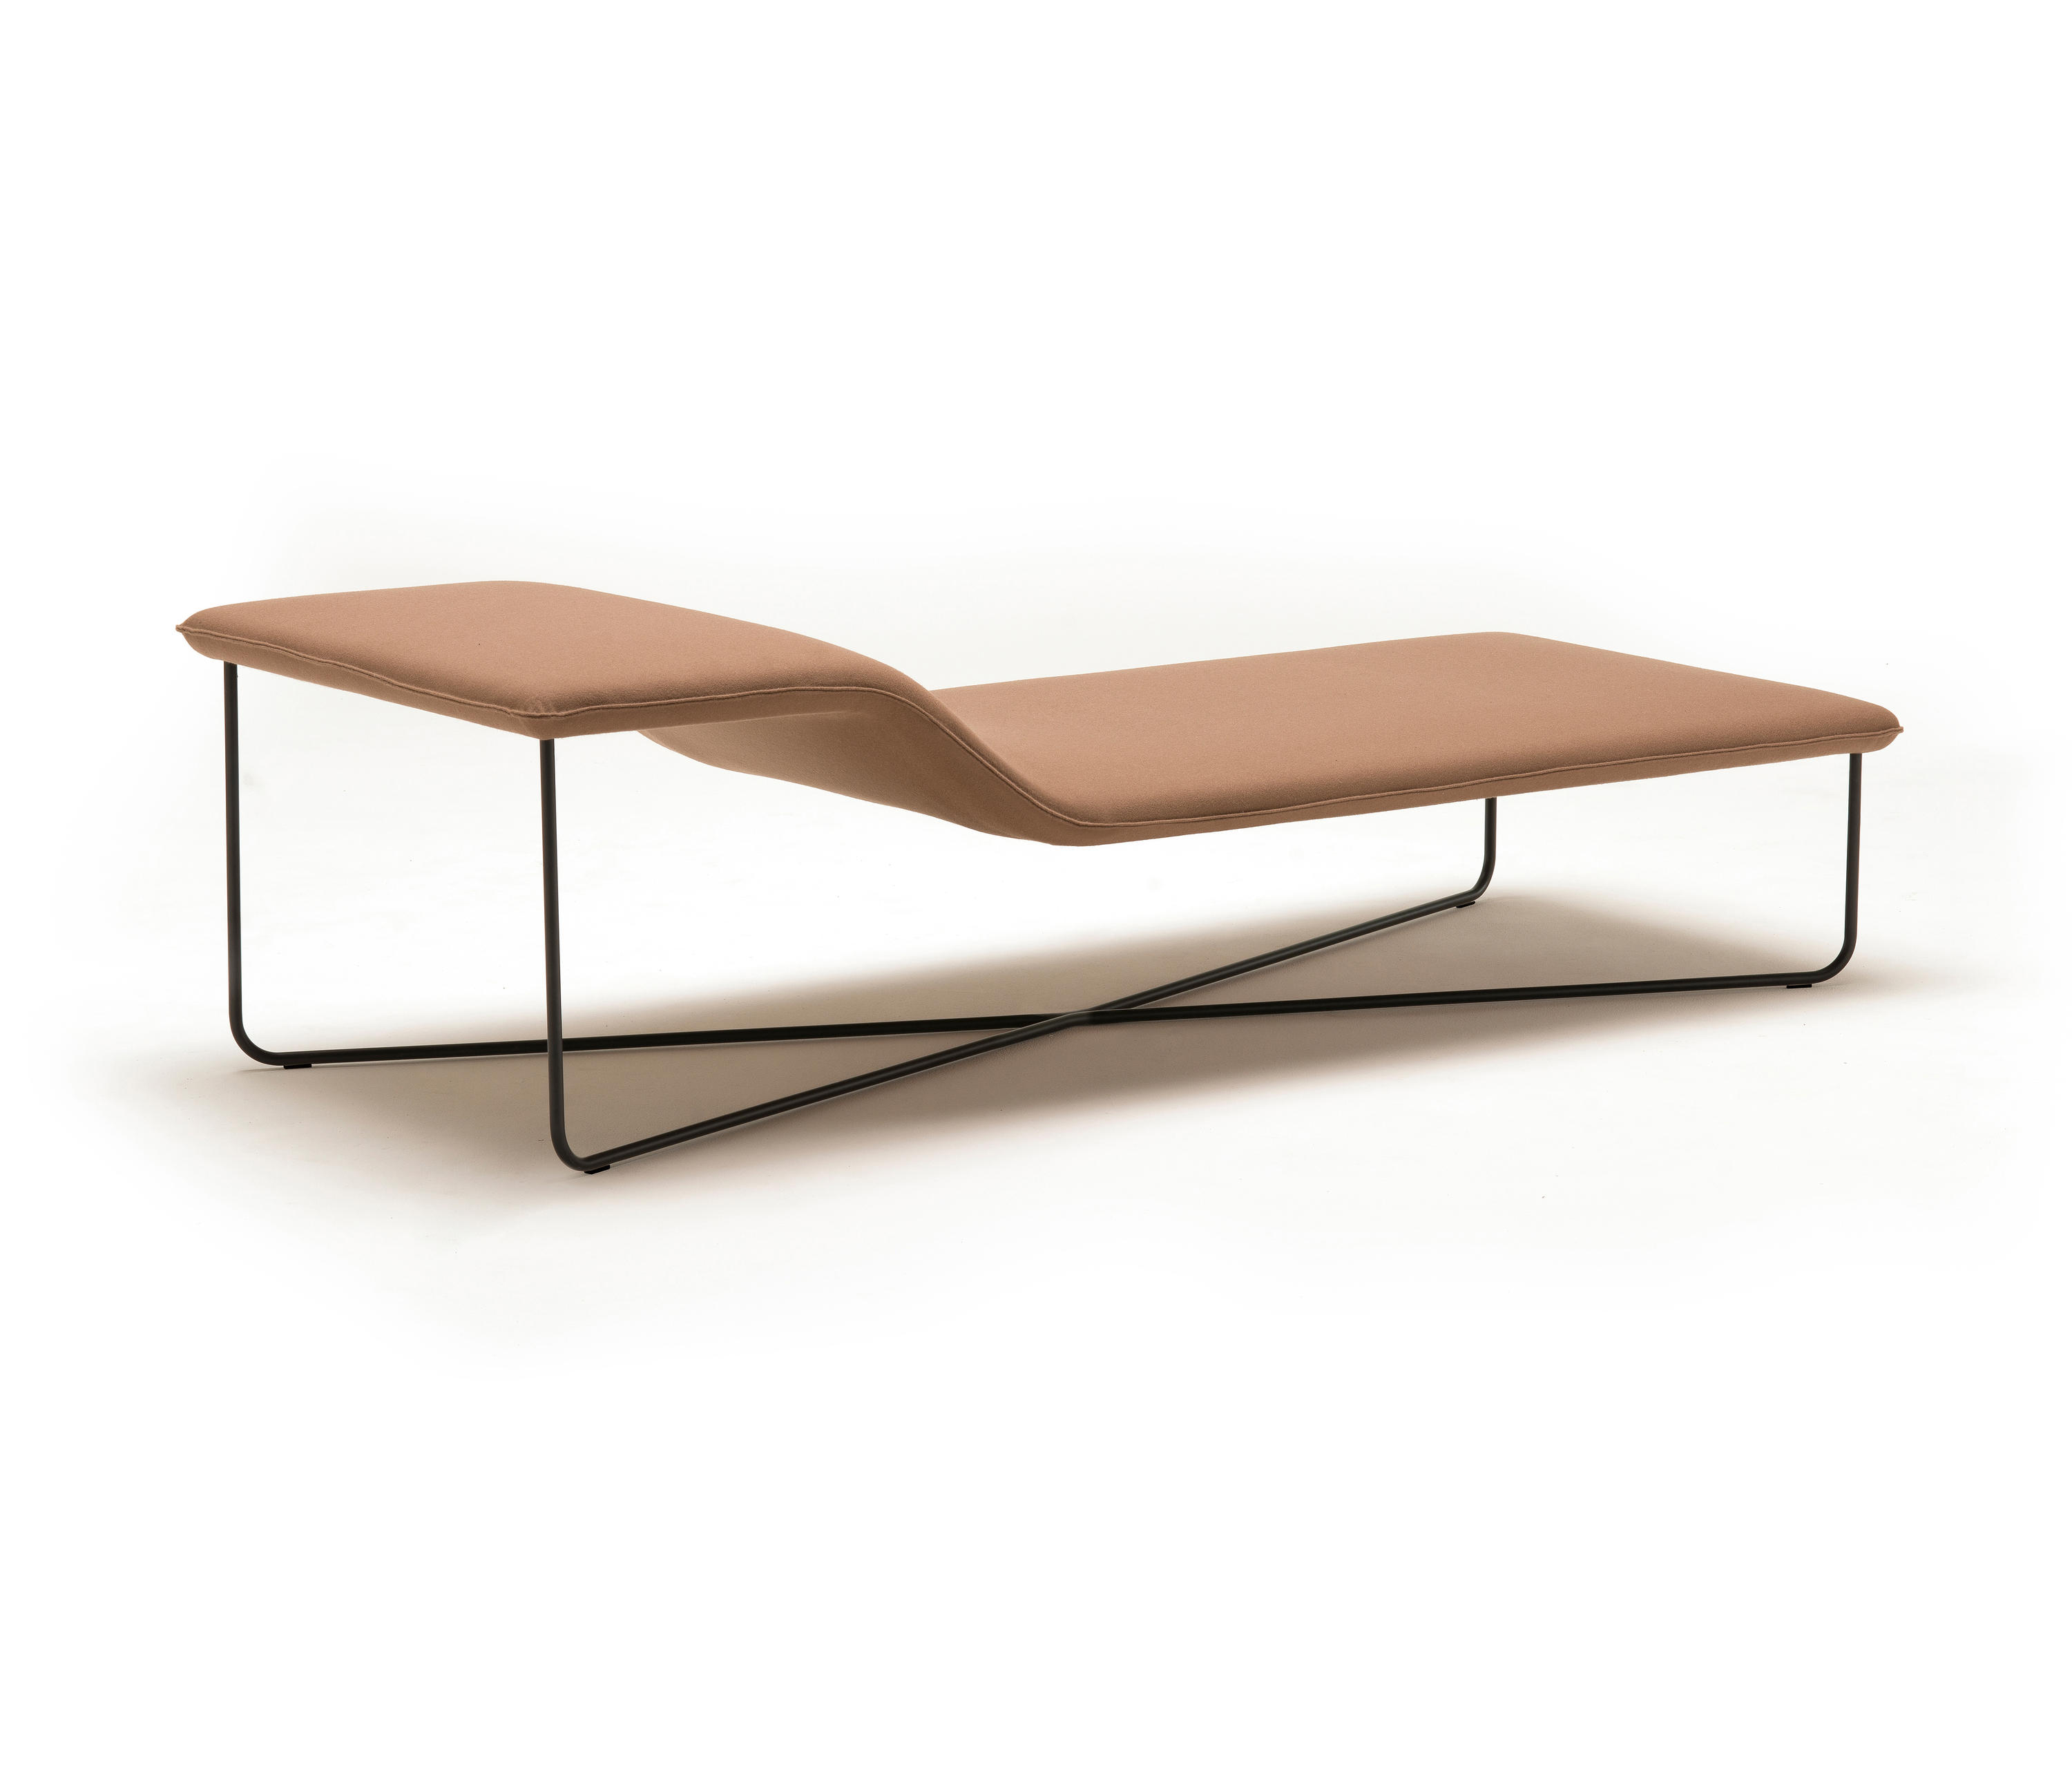 Clivio Daybed by Living Divani